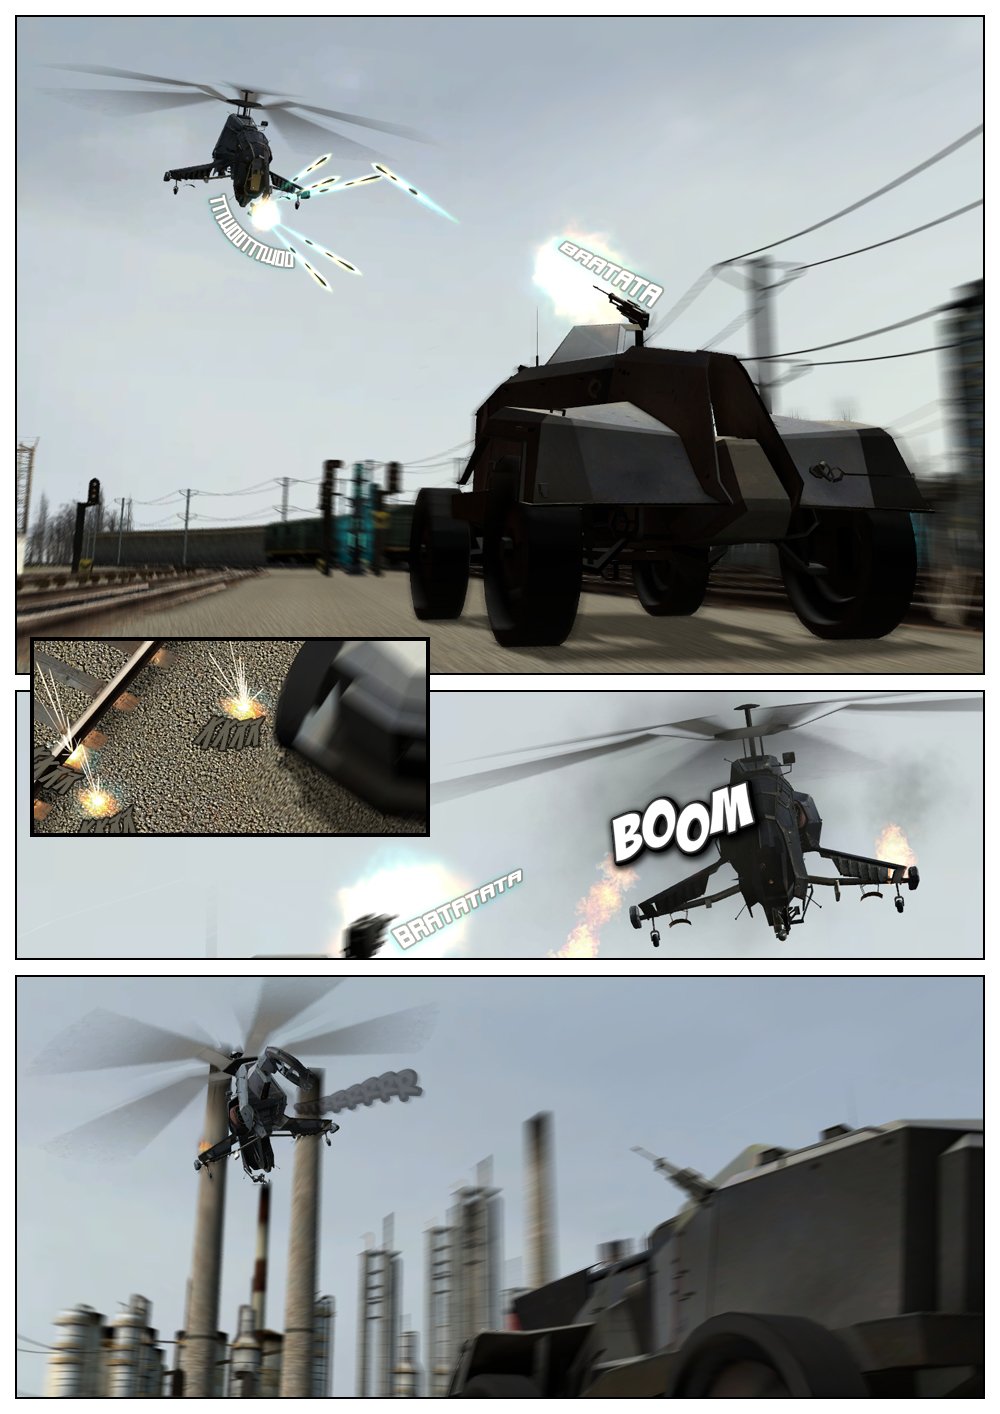 The Hunter-Chopper chases down the APC on the train tracks, both firing at each other. The chopper comes close to hitting the APC, but misses. In return, the APC manages to hit the chopper, causing a small explosion and pieces of it to fly off burning. The chopper speeds up and flies over the APC.